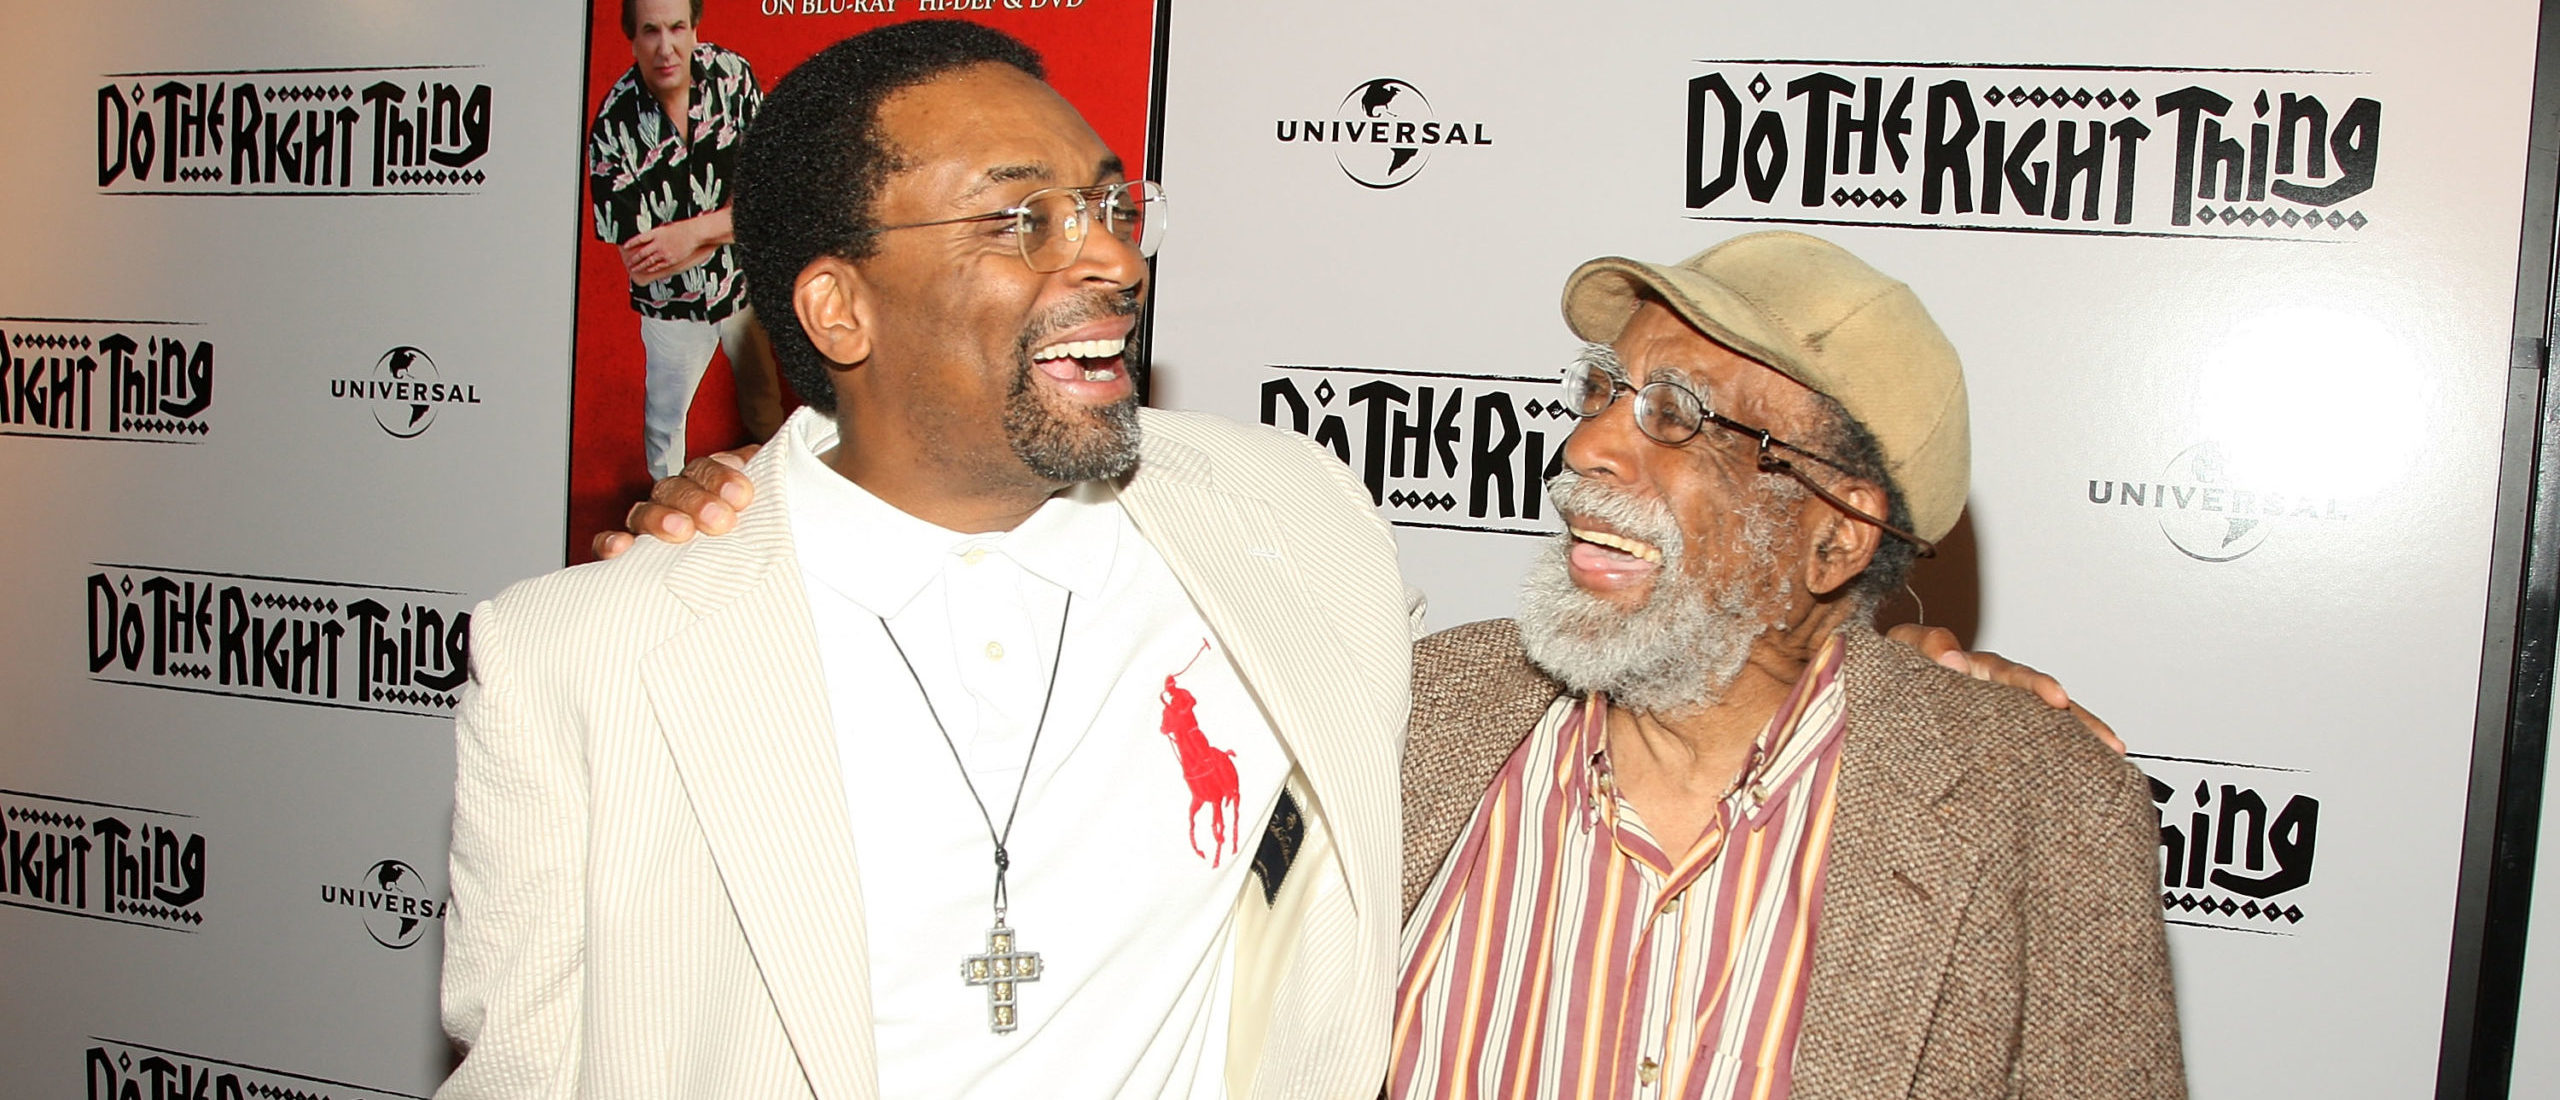 Bill Lee, Bassist and Composer of Son Spike Lee's Films, Dies at